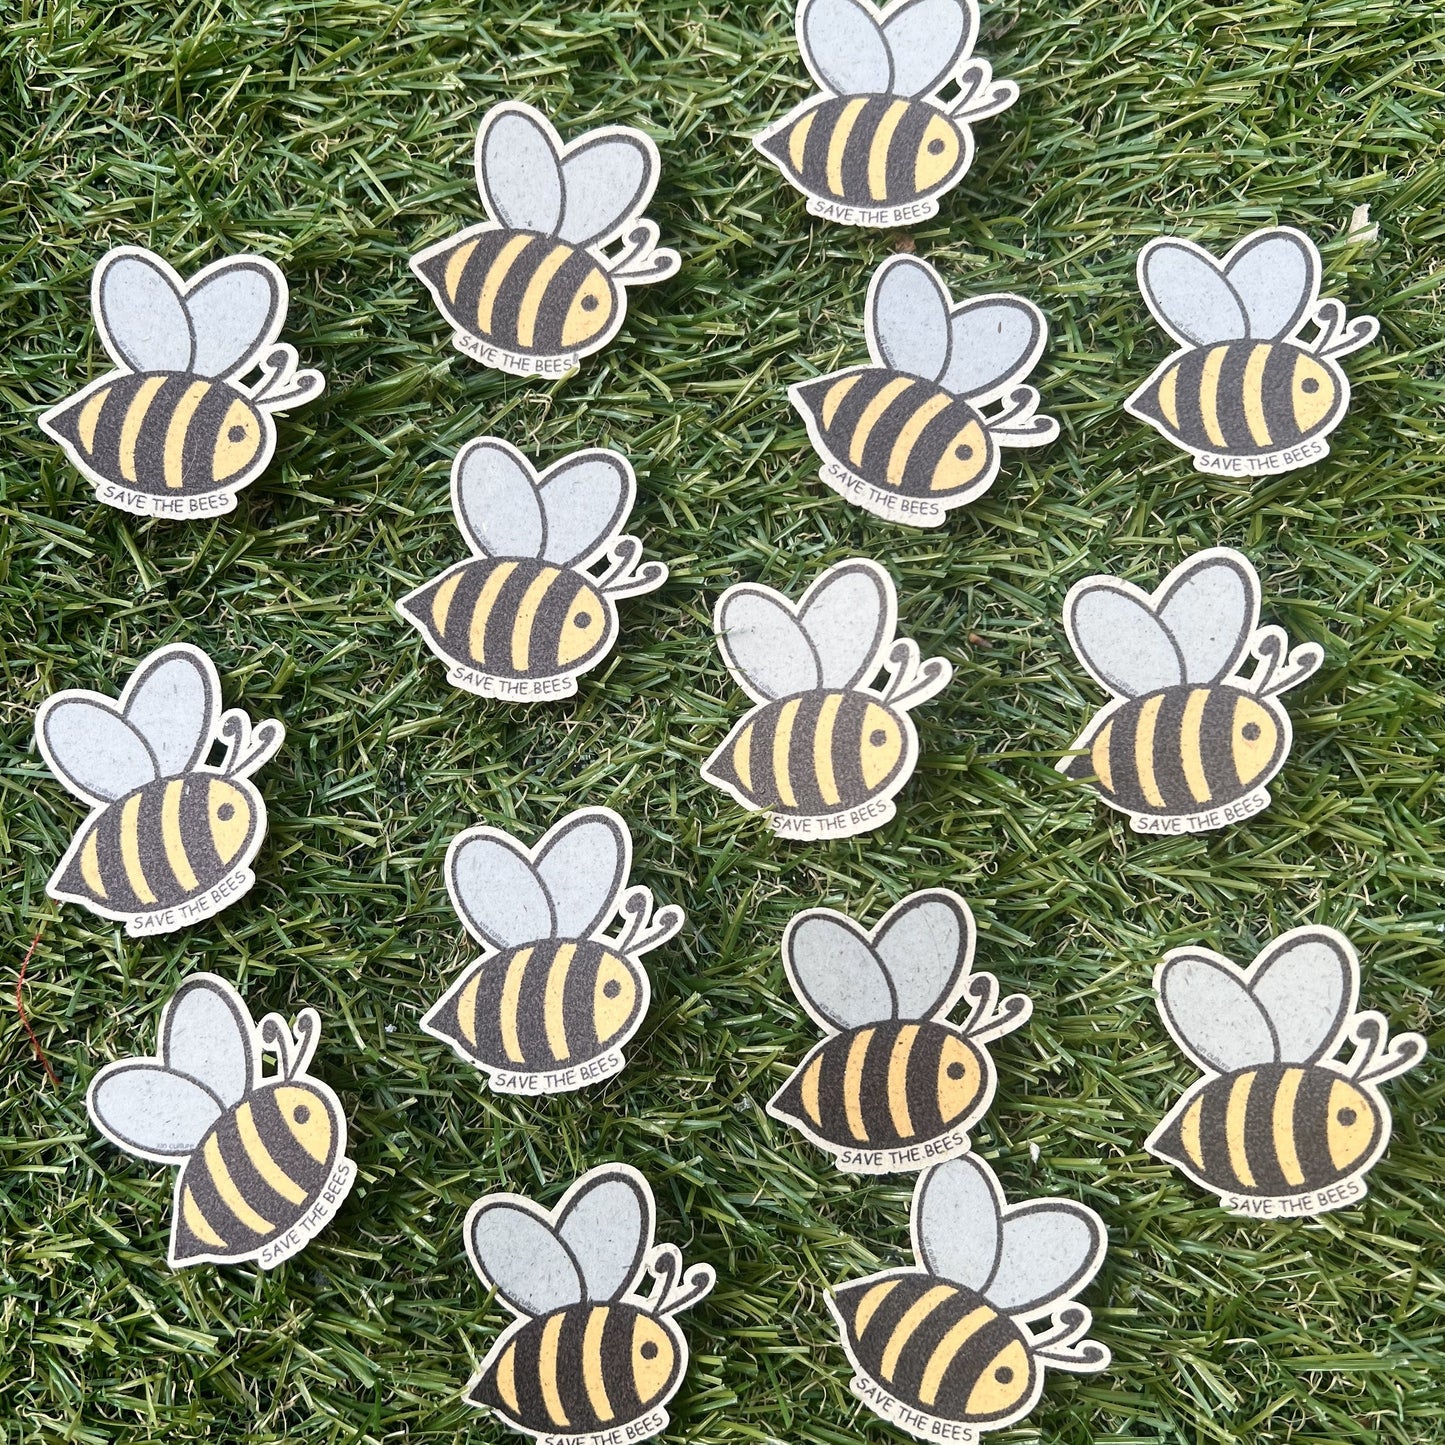 "Save the bees" sticker (3pcs)